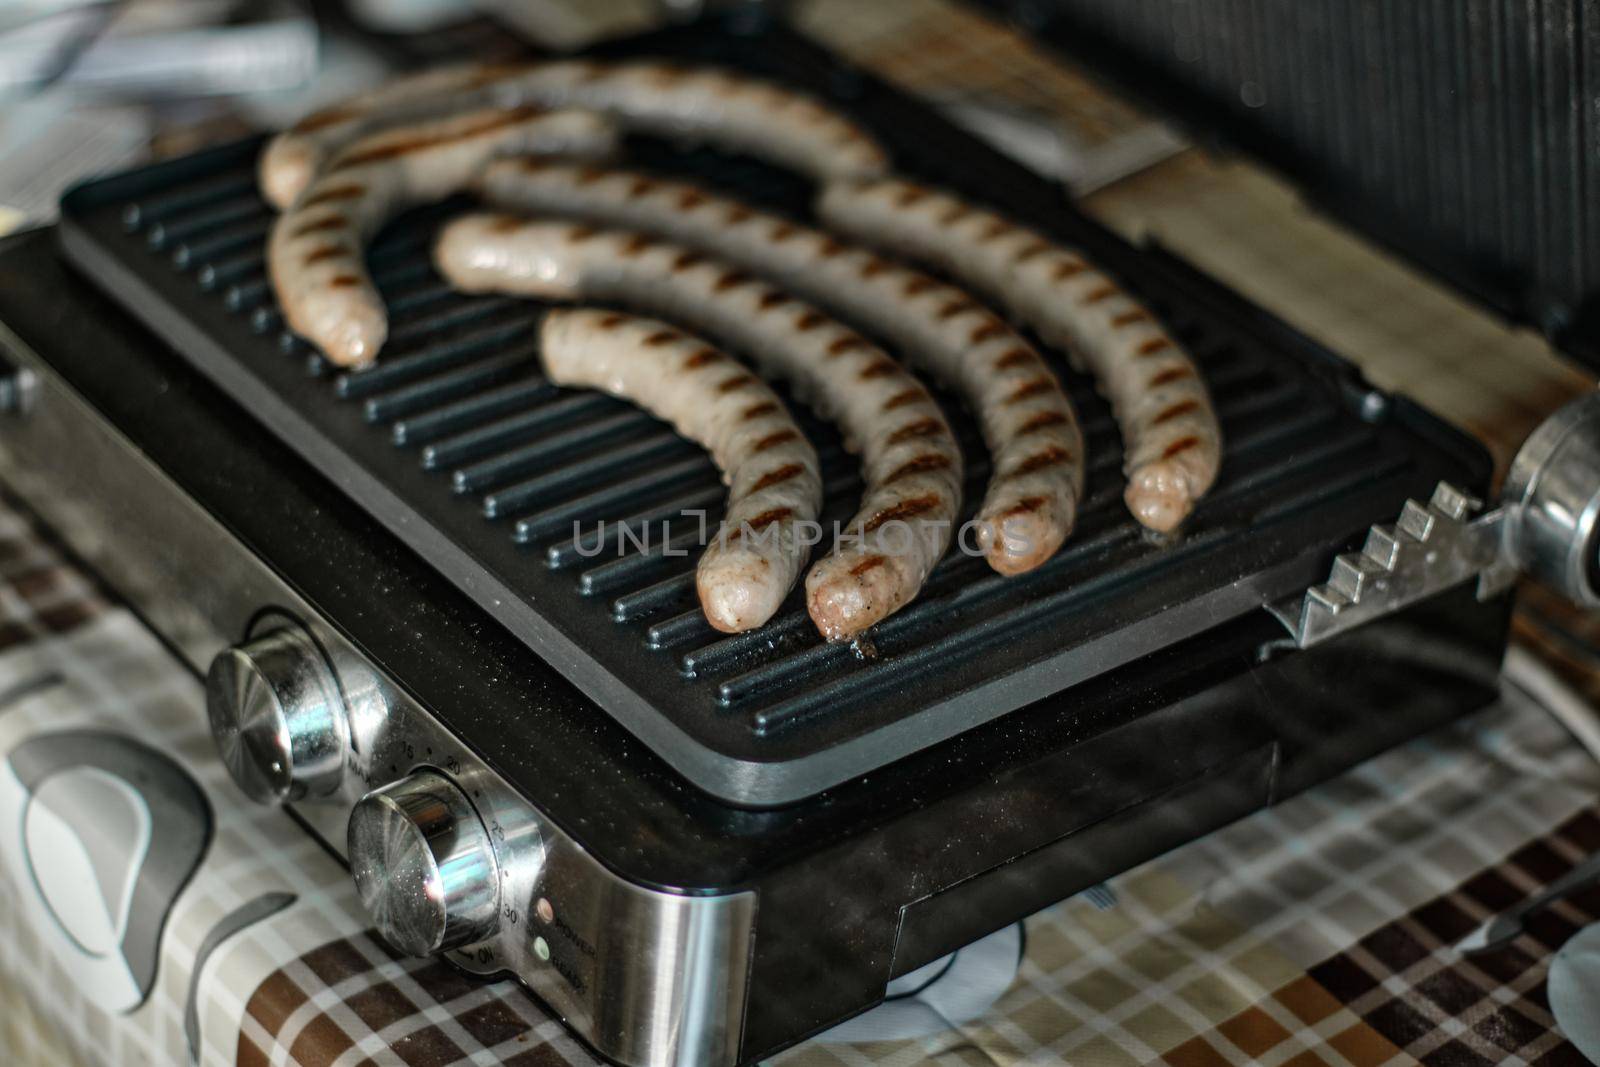 Grilled sausages are cooked by snep_photo